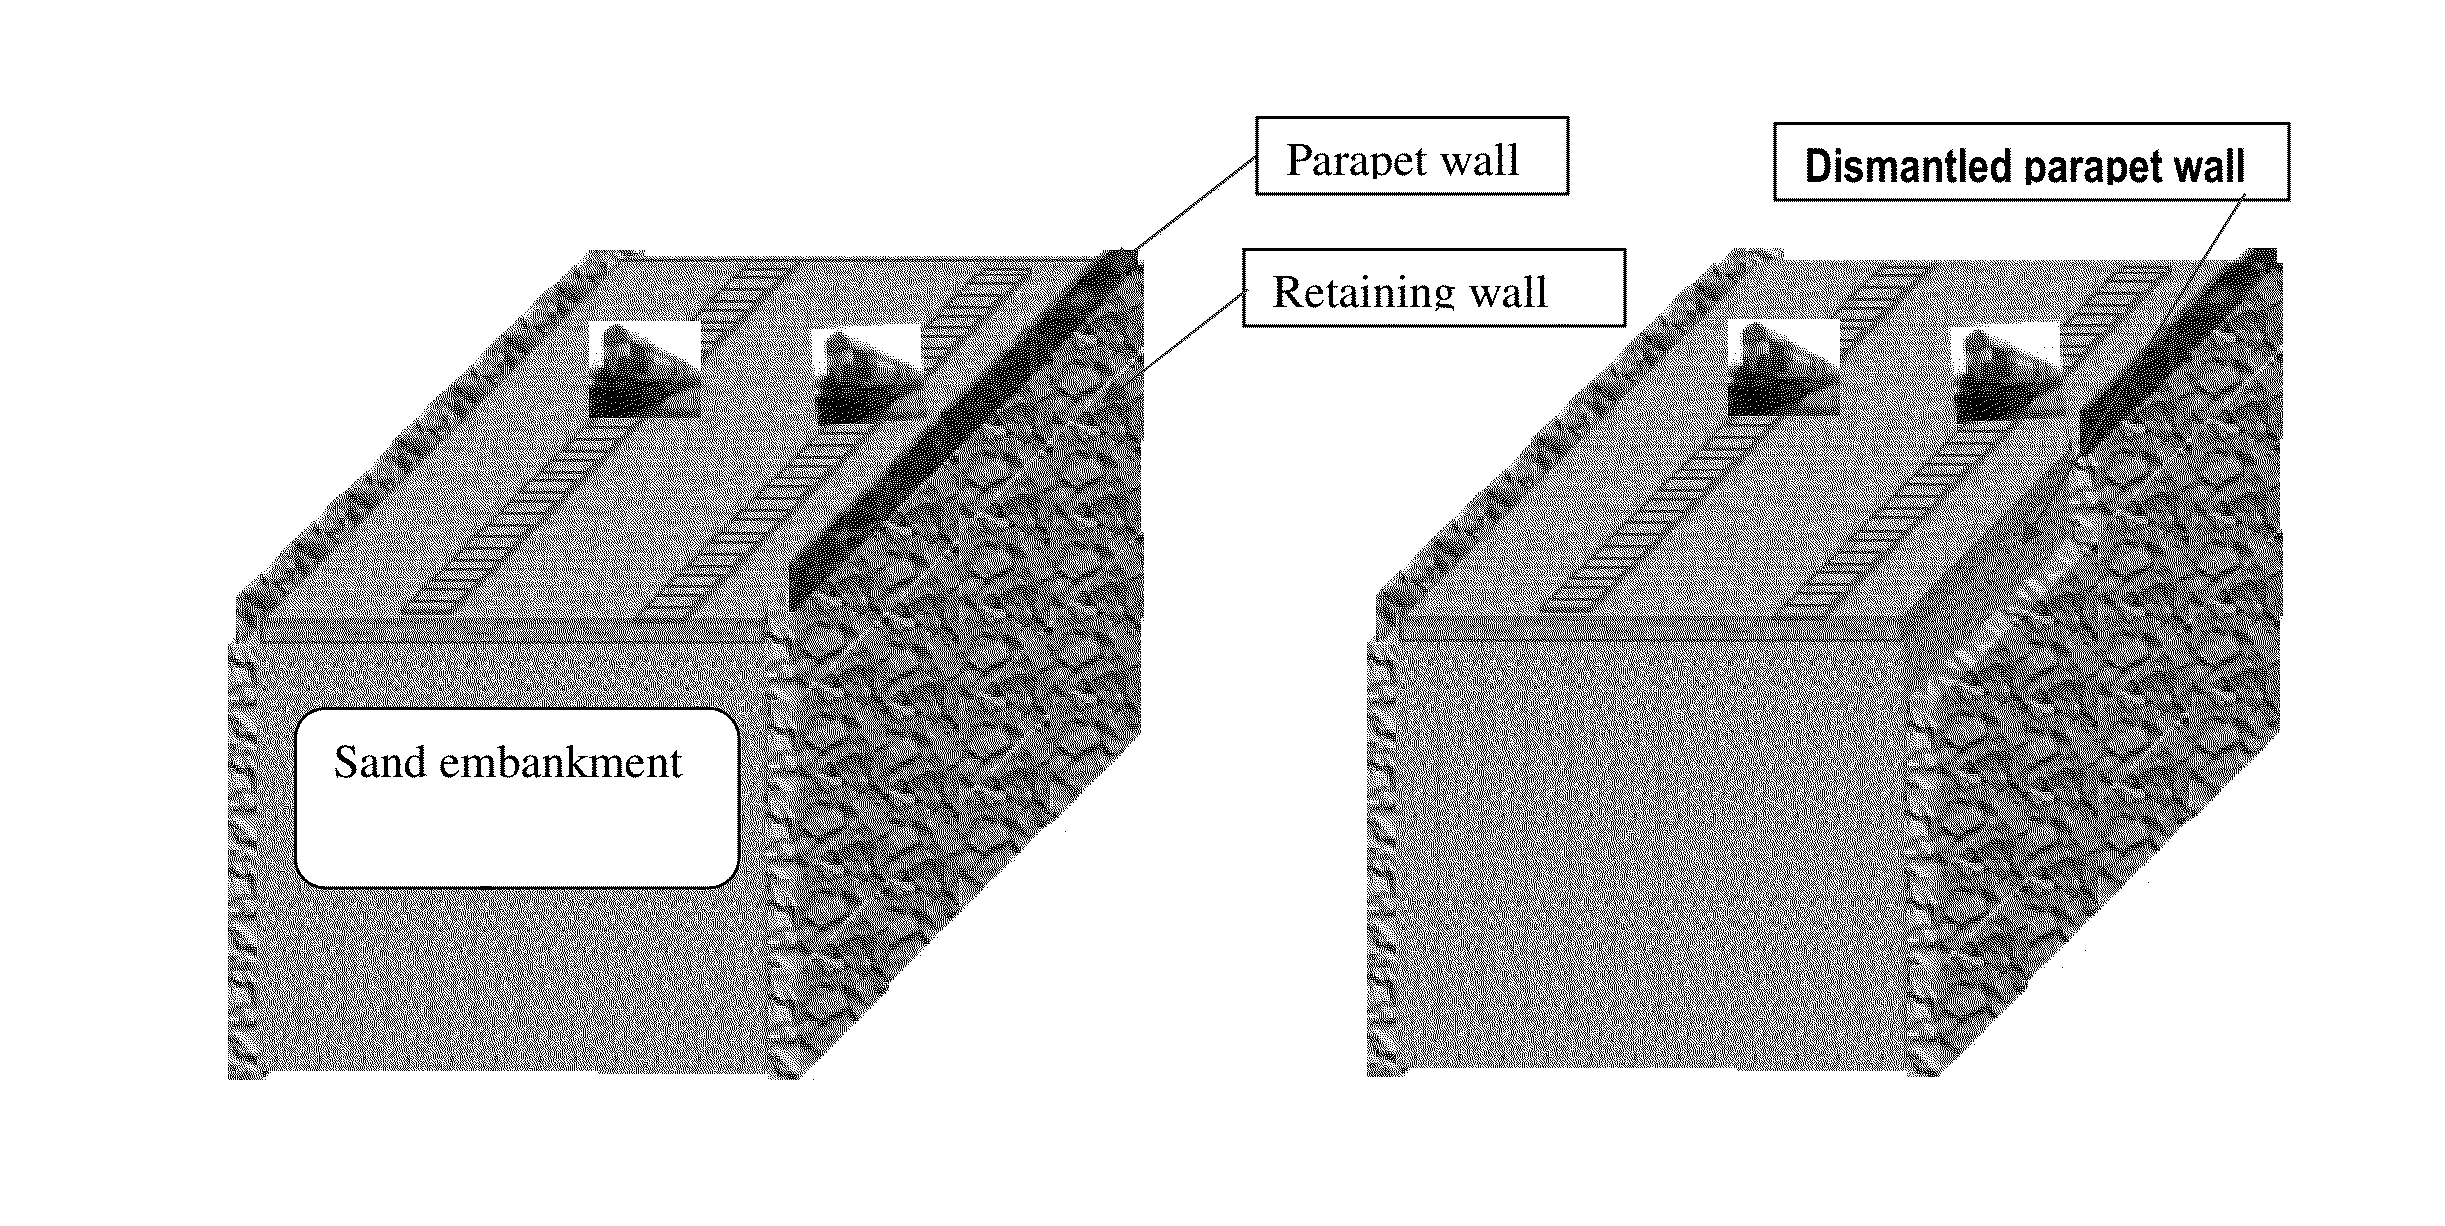 Stepwise repeated destabilization and stabilization of highly collapsible soil mass by 'soil nailing technique' used for construction of railway/road underpass